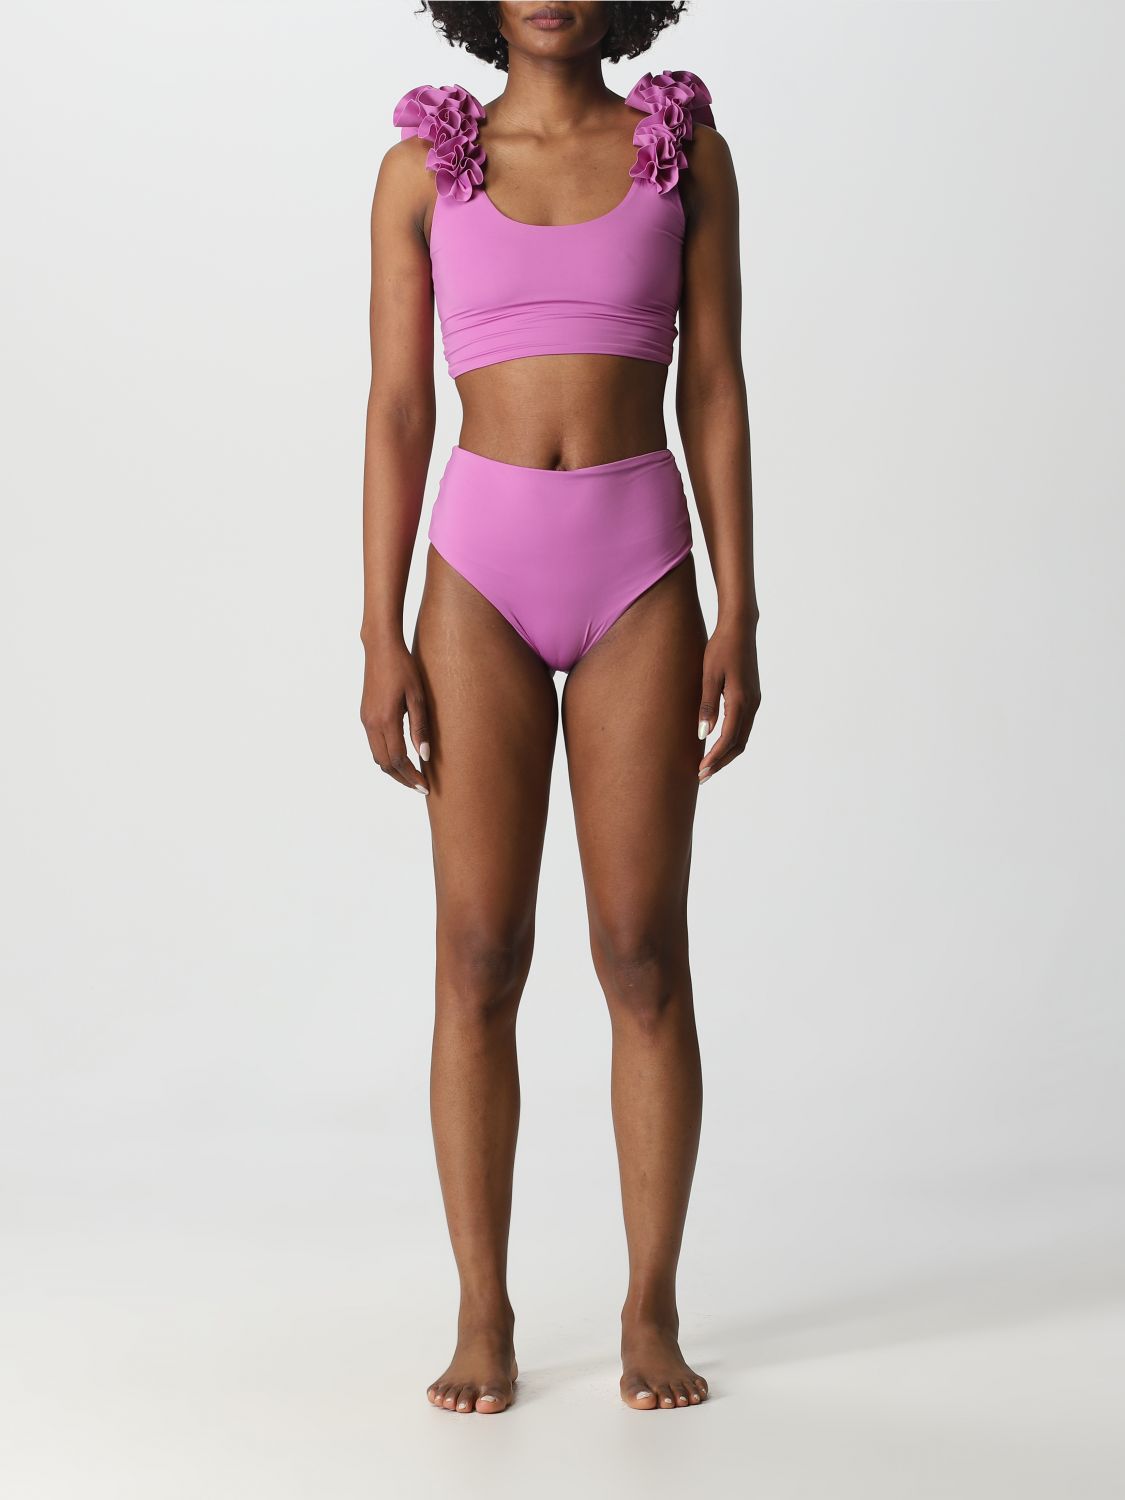 Maygel Coronel Swimsuit  Woman In Violet